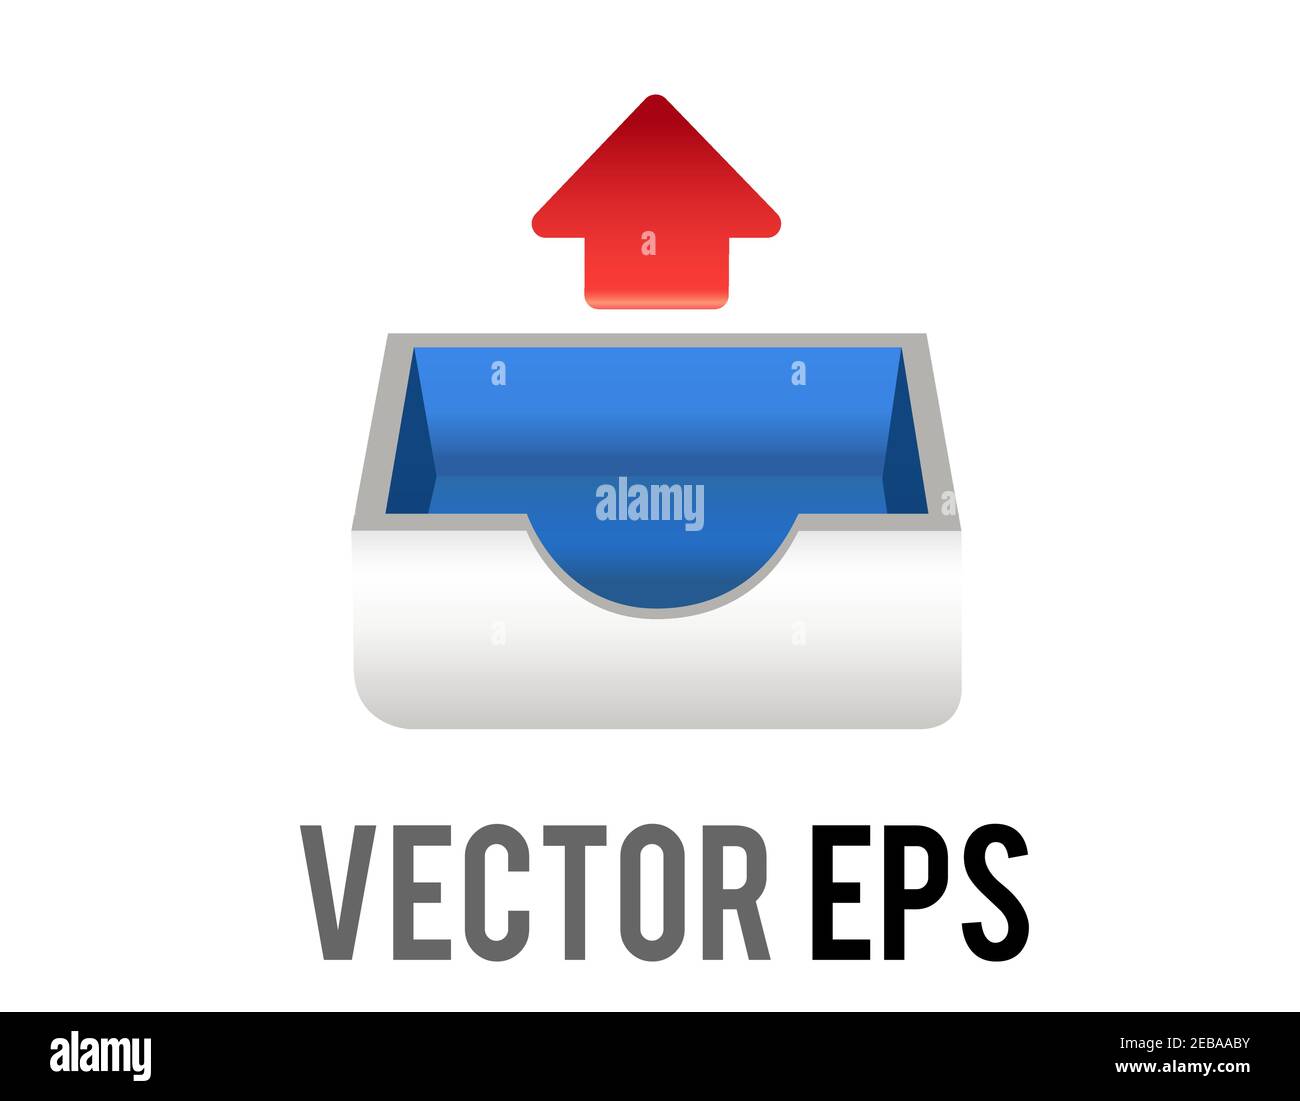 The isolated vector mail, document paper tray icon with red up arrow for email outbox, used for digital activity, uploading, messaging, ordering, shar Stock Vector